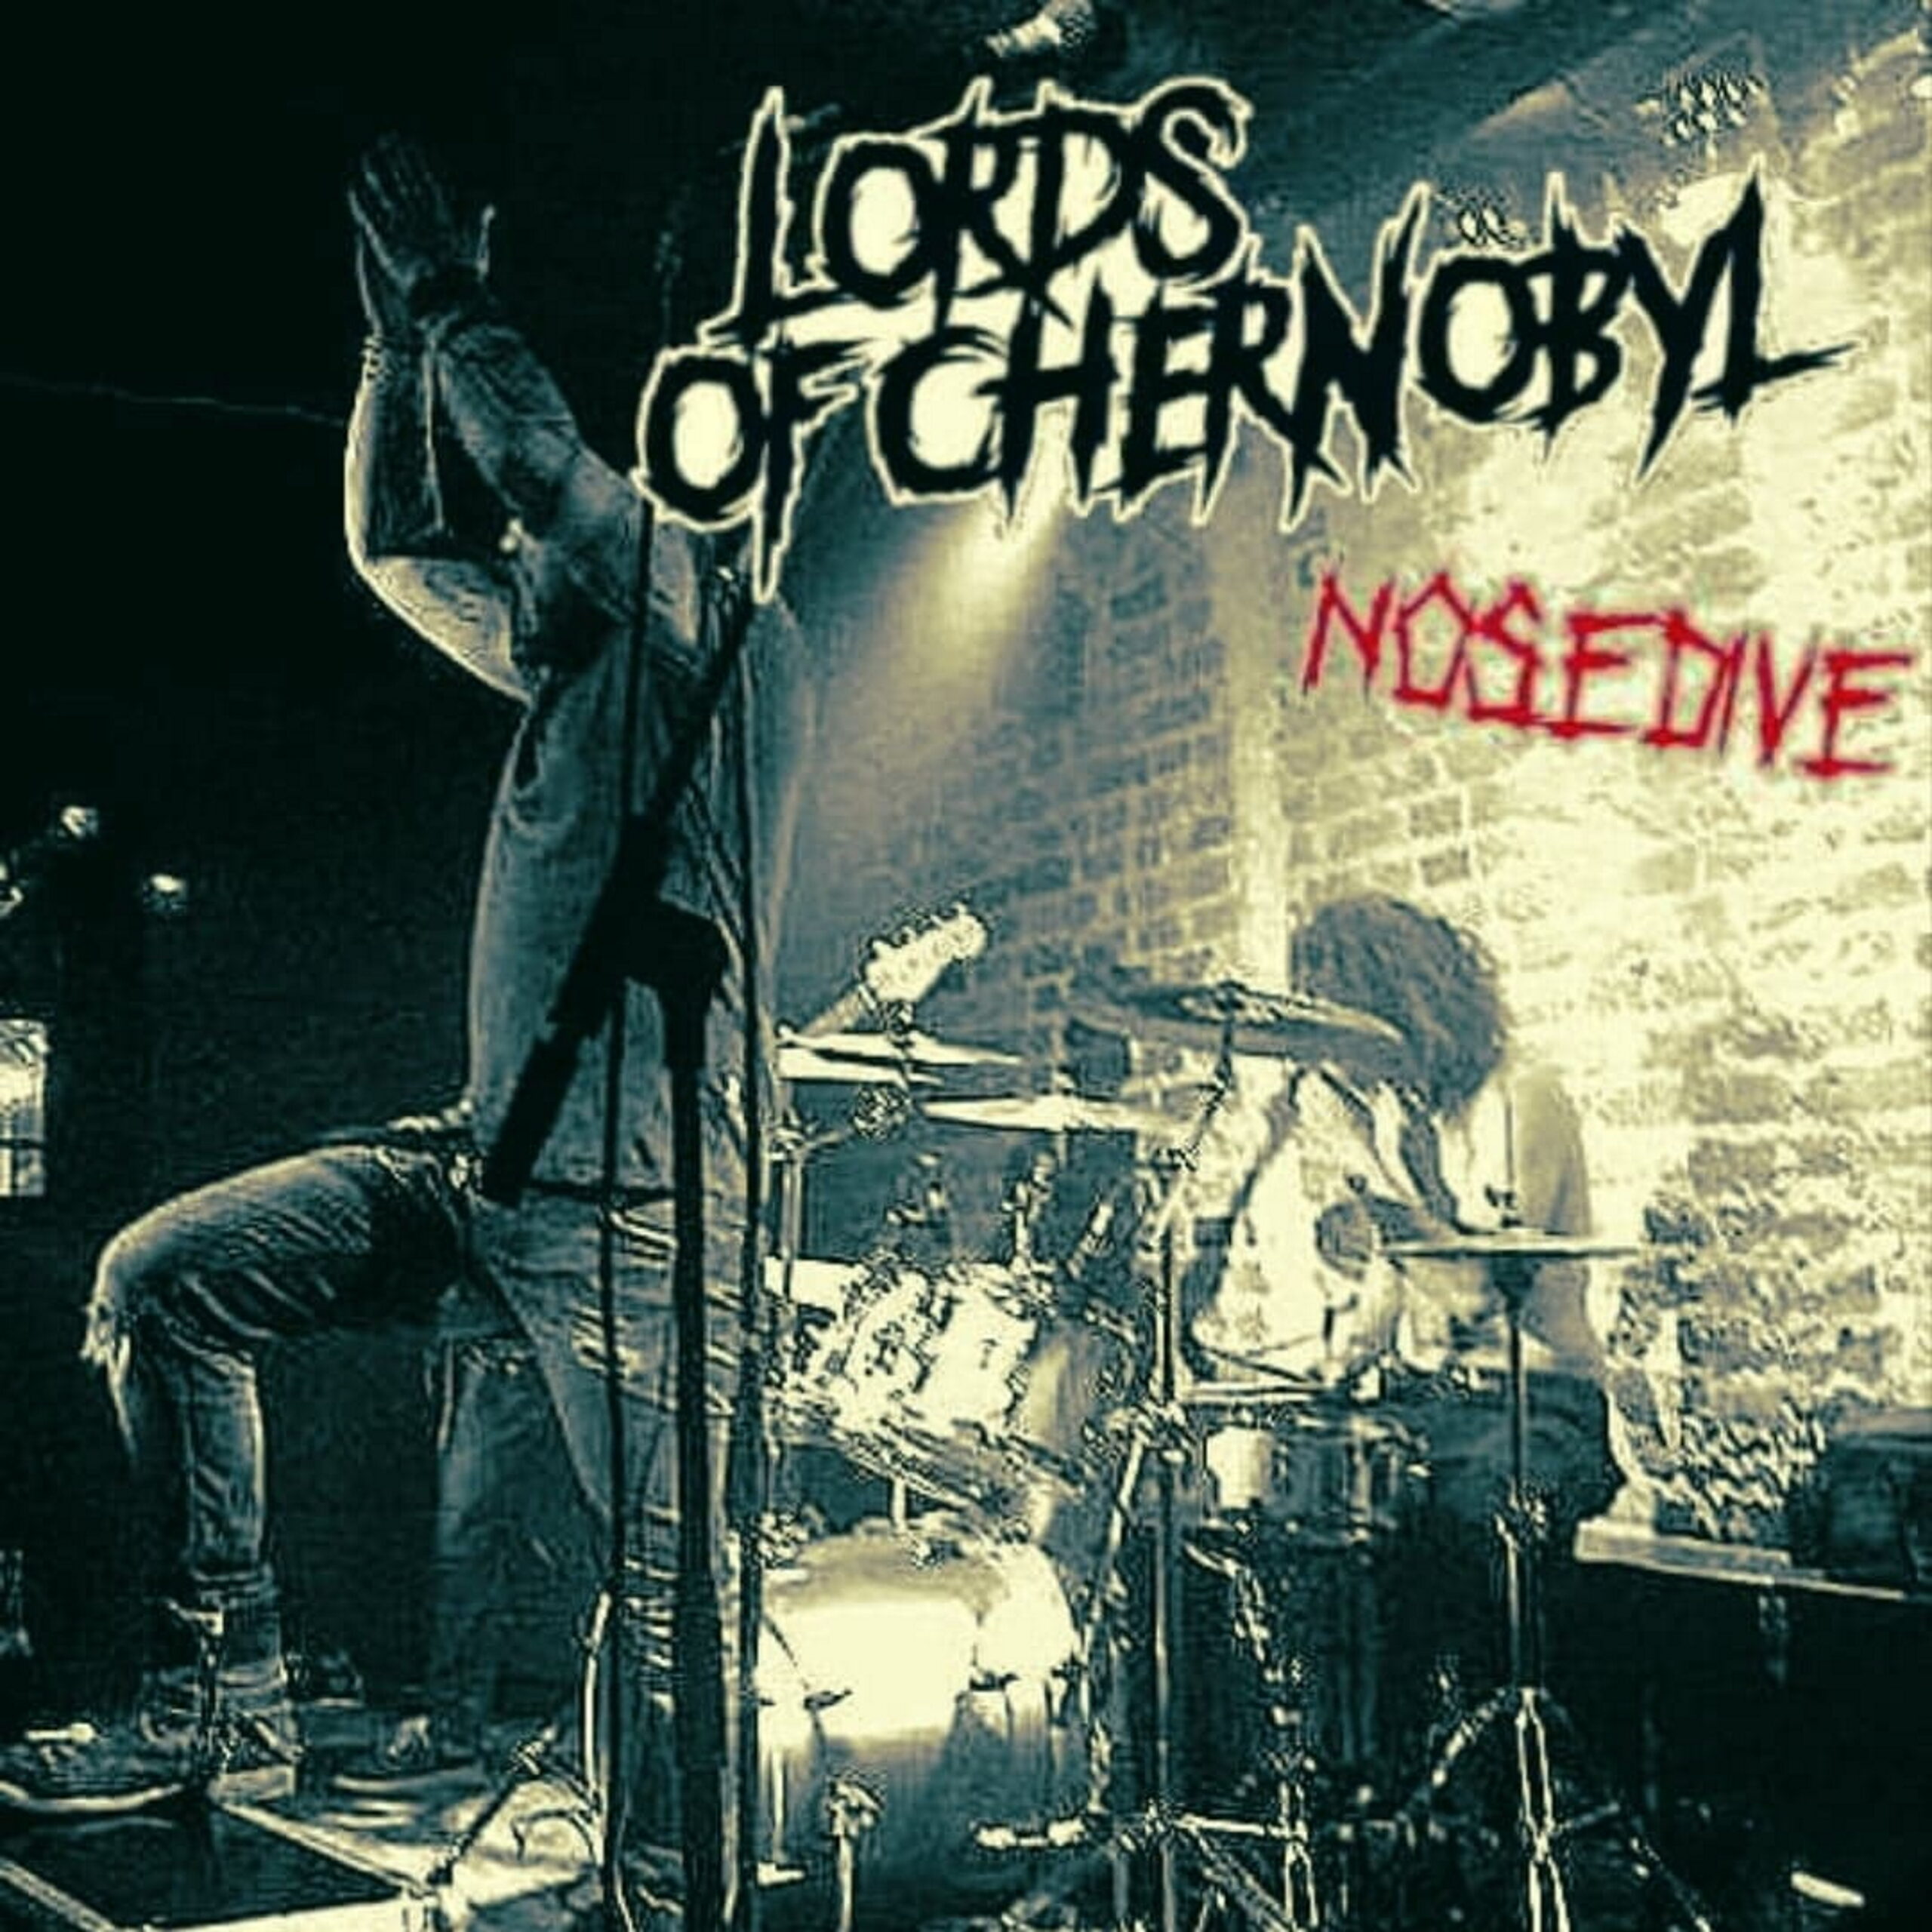 Out now! Deathpunks Lords of Chernobyl returned with new single ‘Nosedive’!